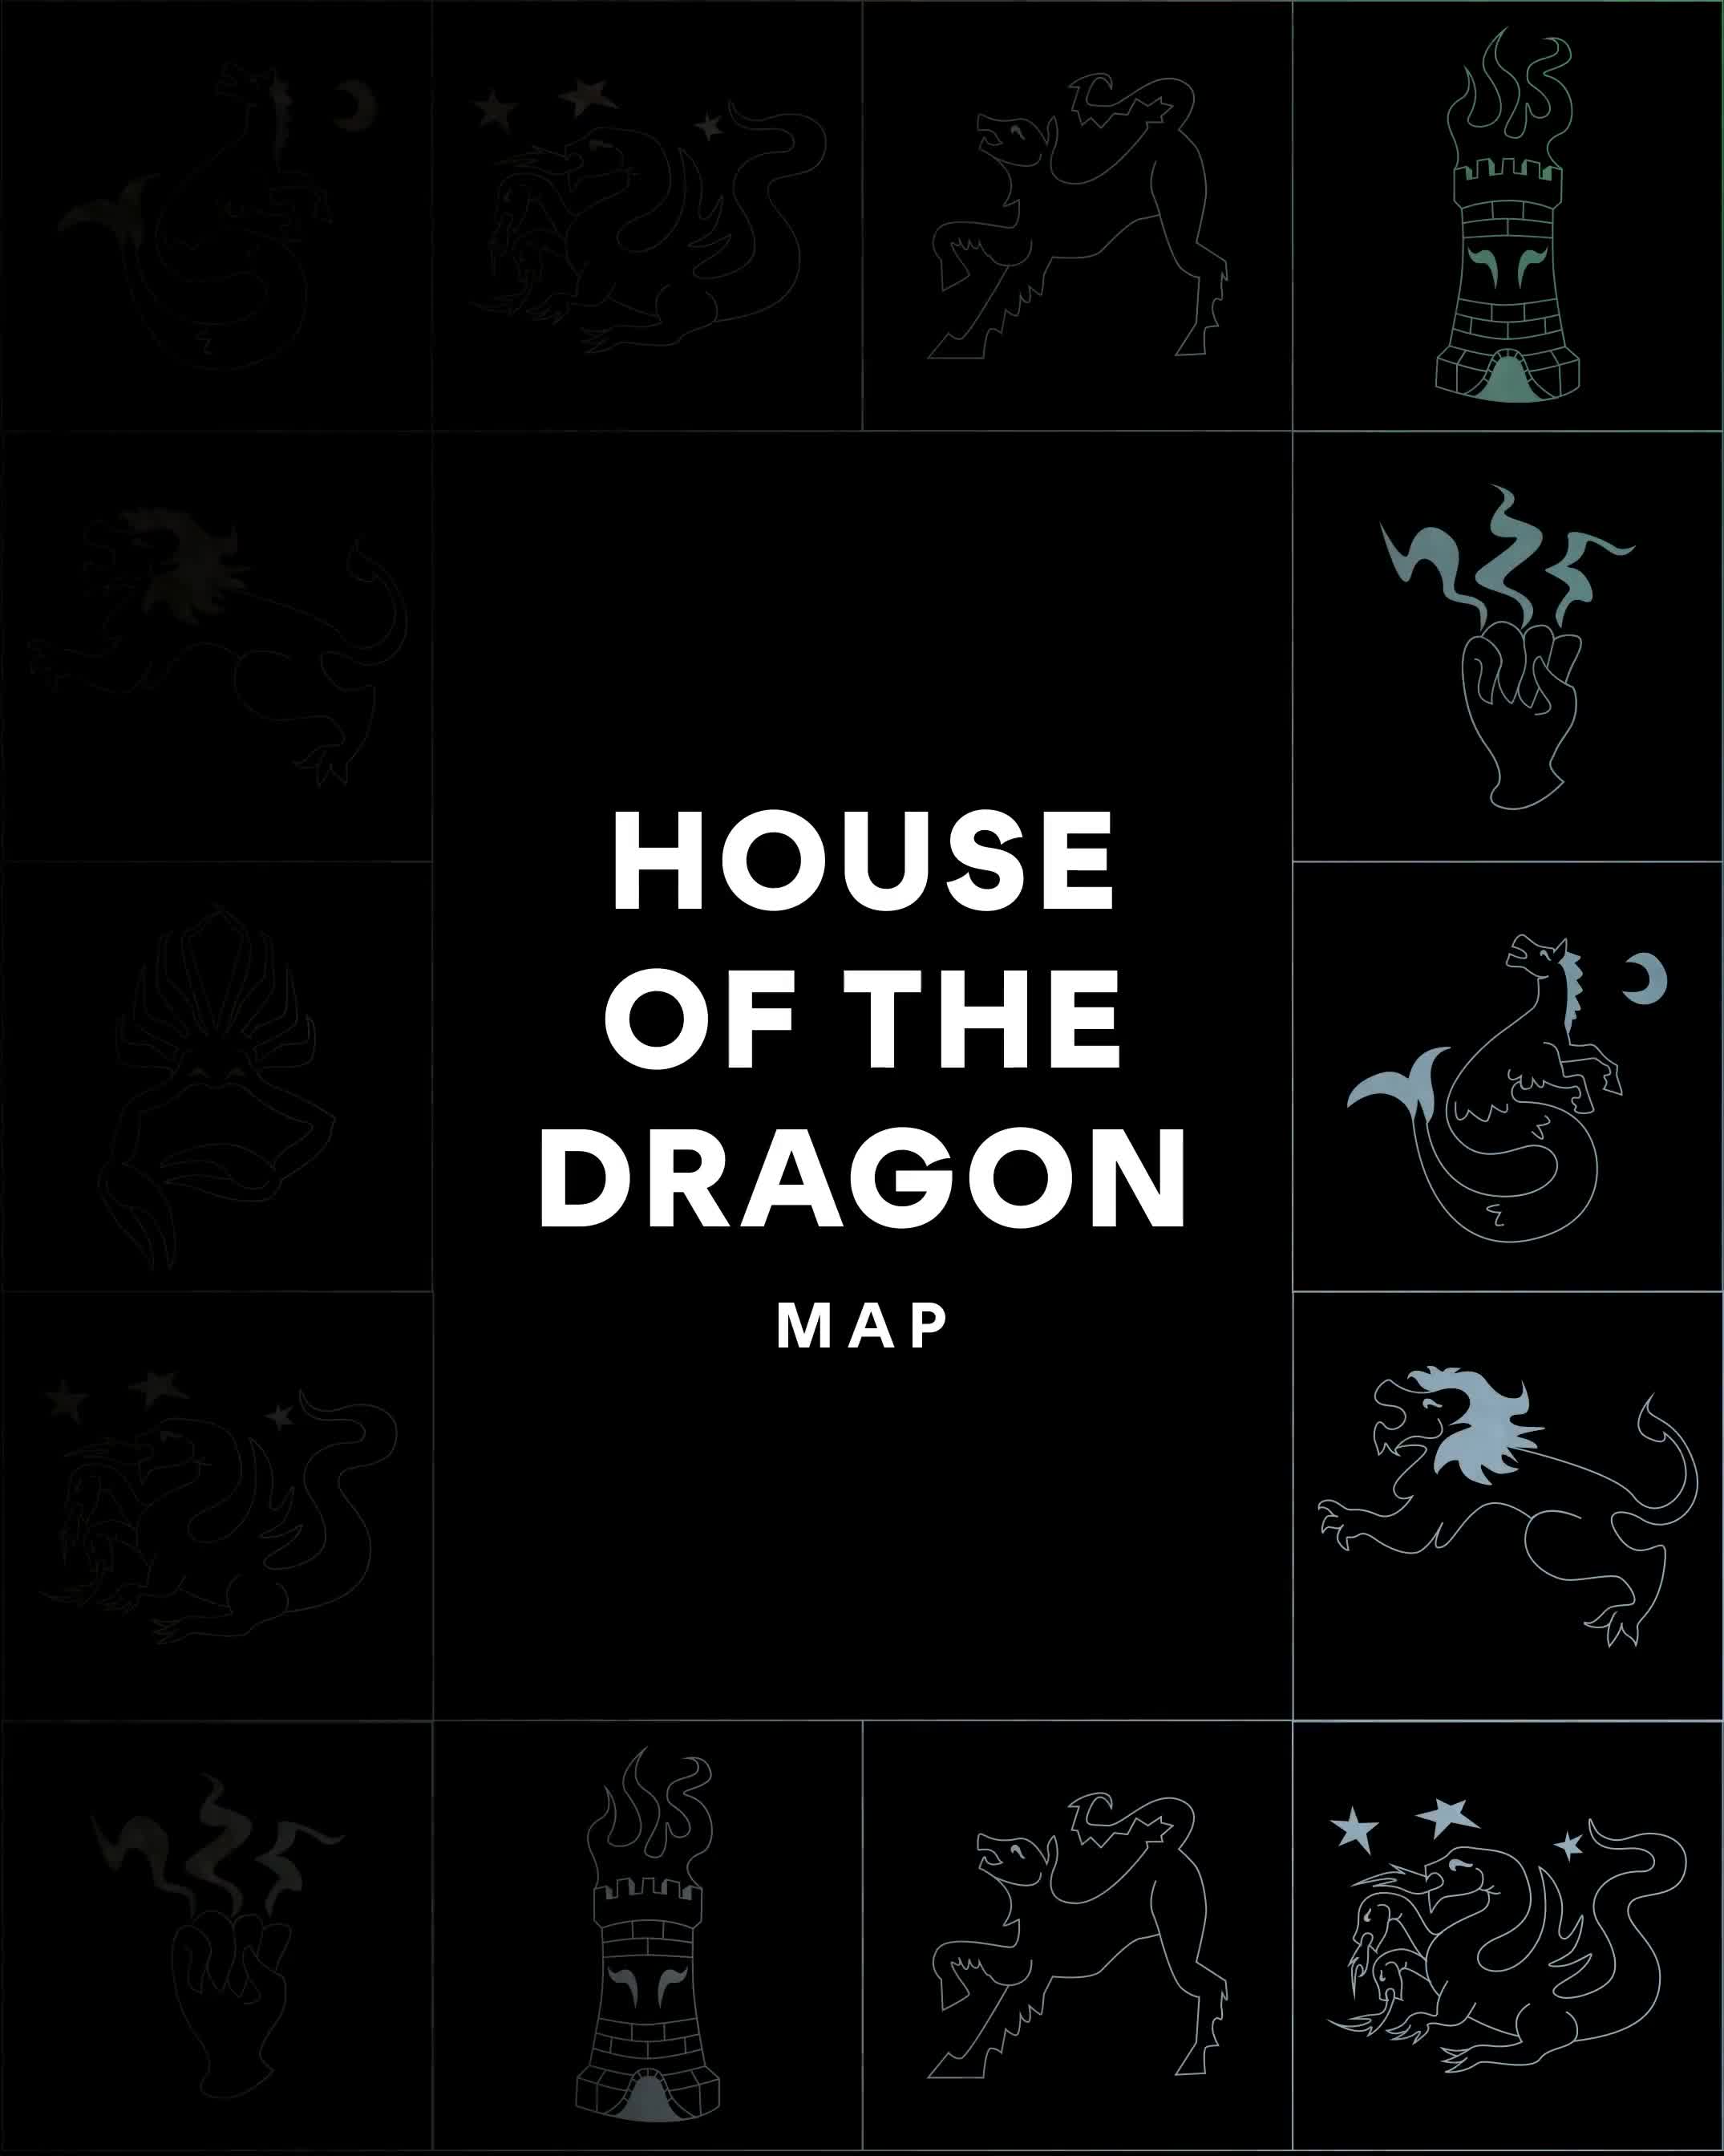 House of the Dragon' Map of Westeros